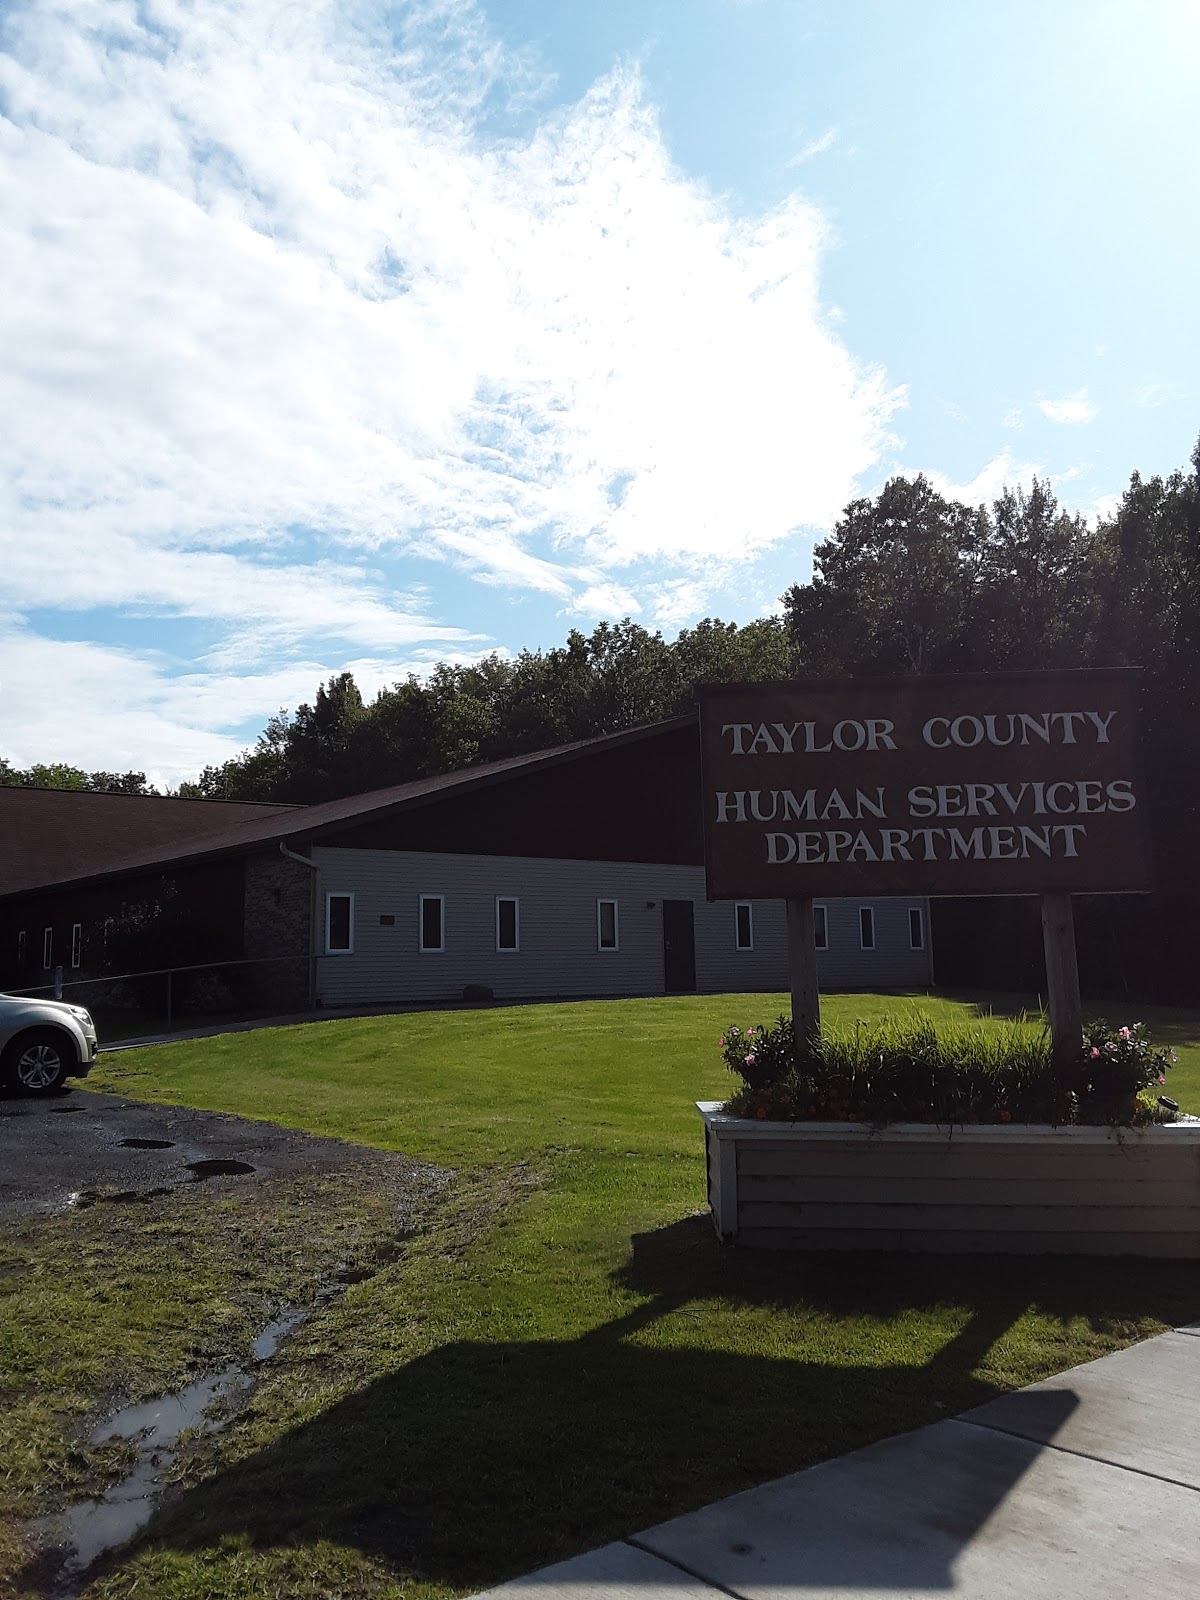 Taylor County - Human Services Department